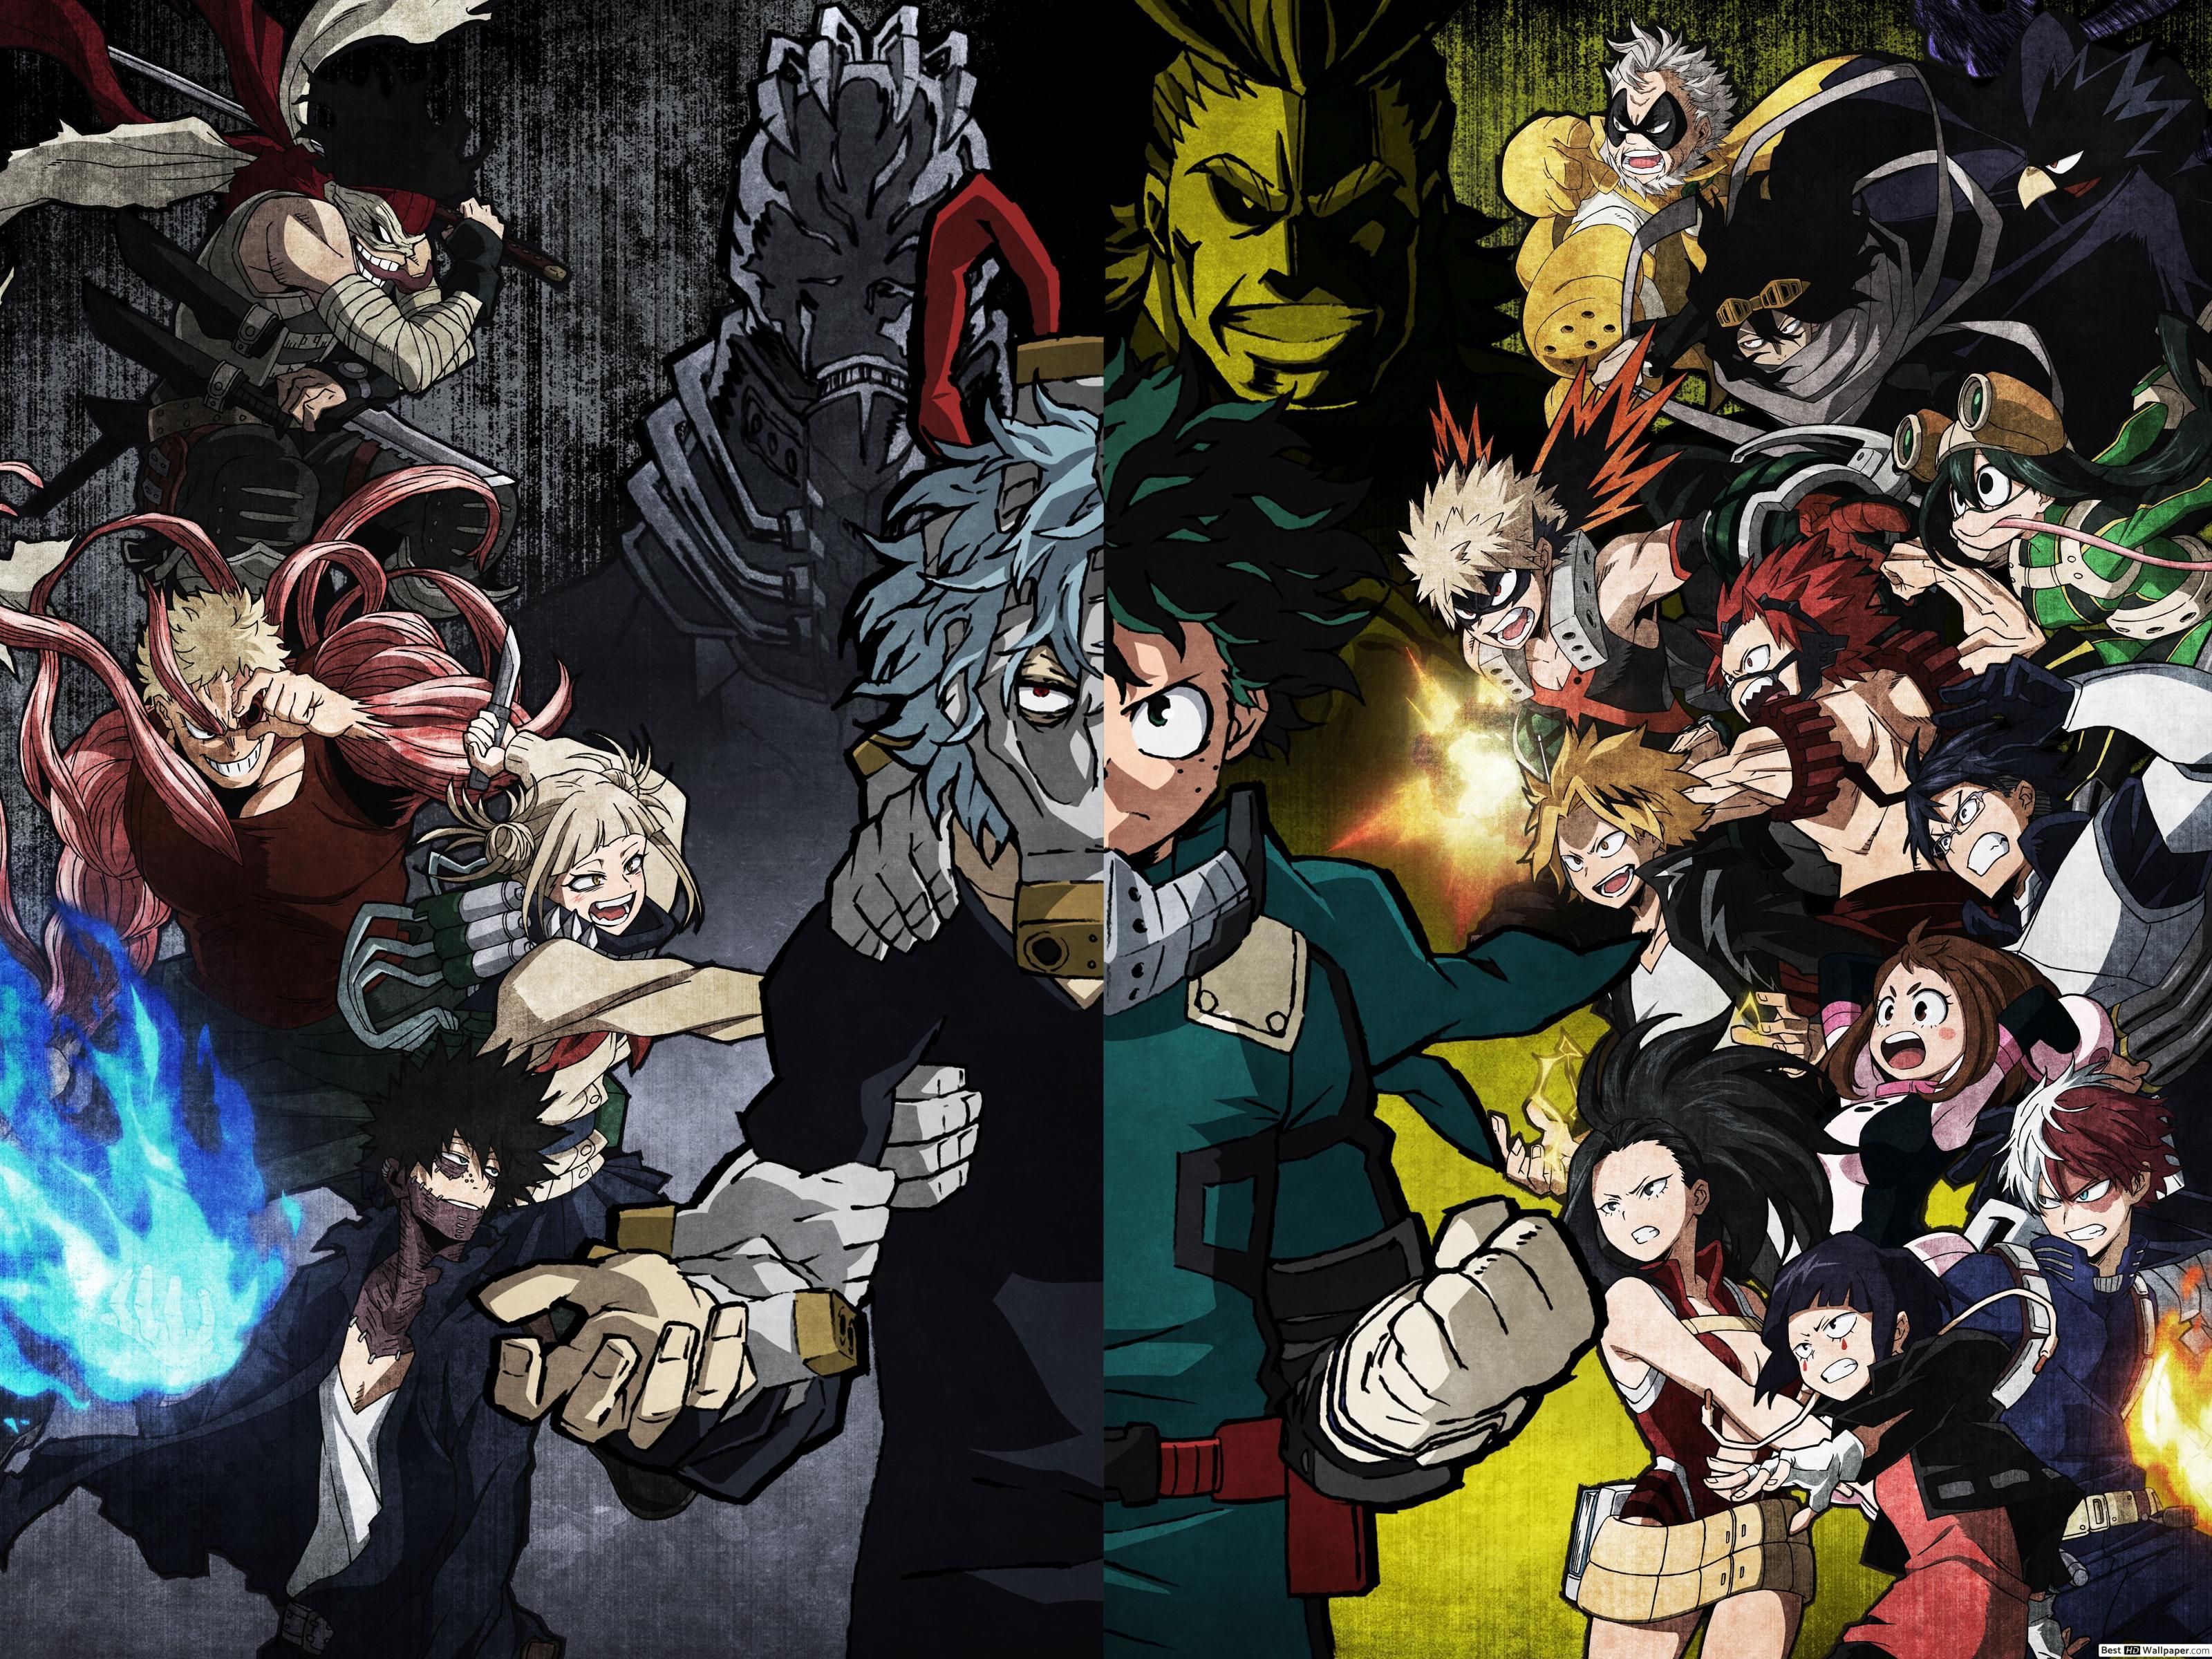 10 Most Overhyped Anime Villains, Ranked